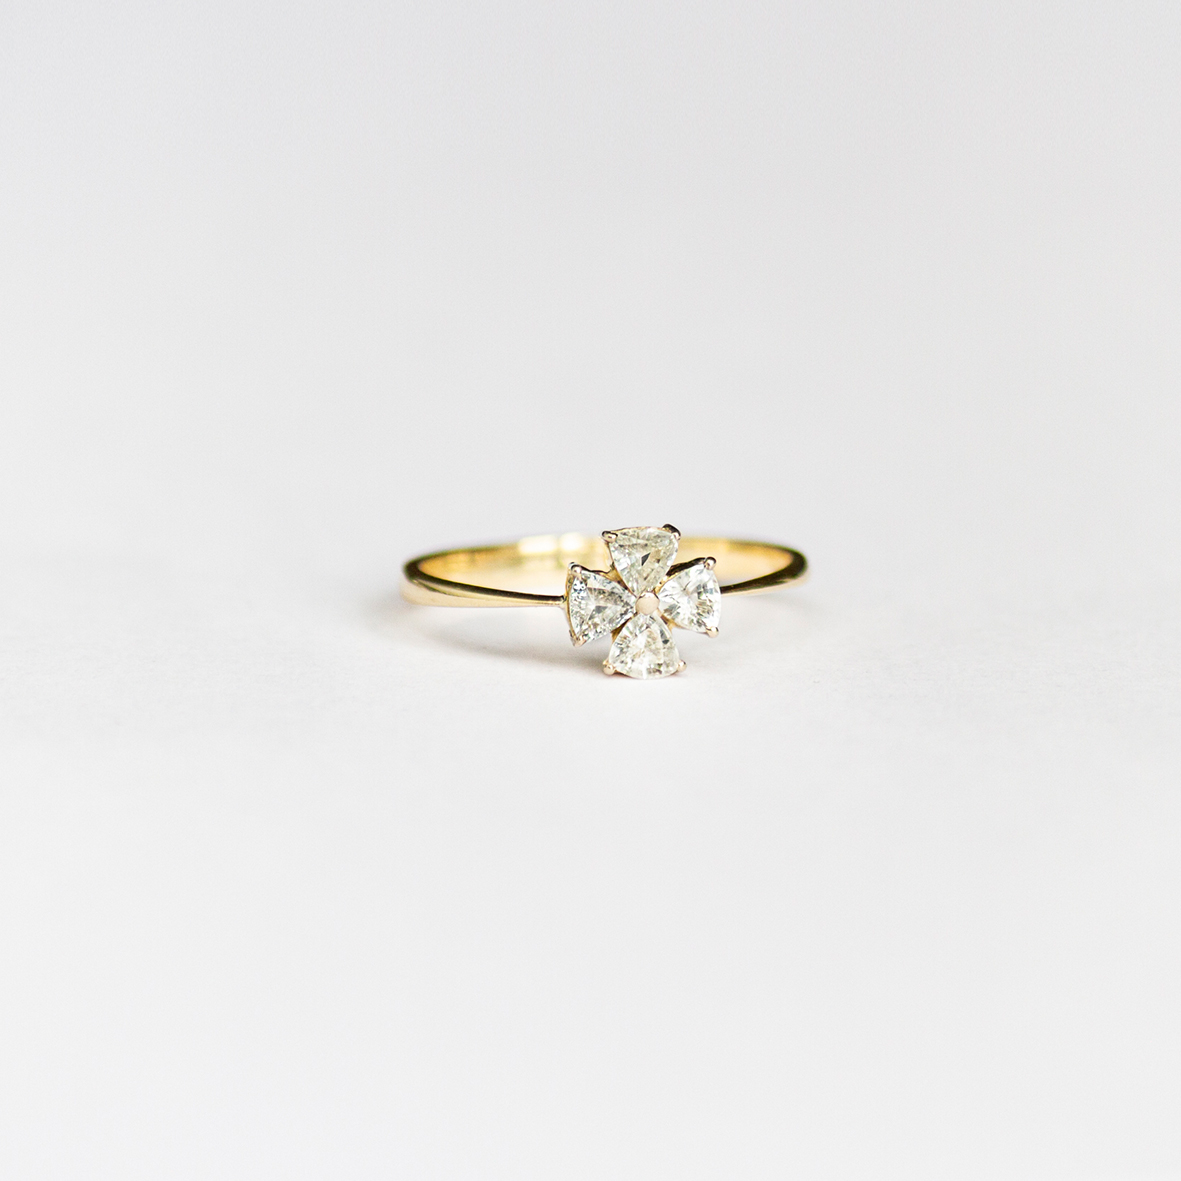 2. OONA_engagement_ficha1_sapphire clover ring